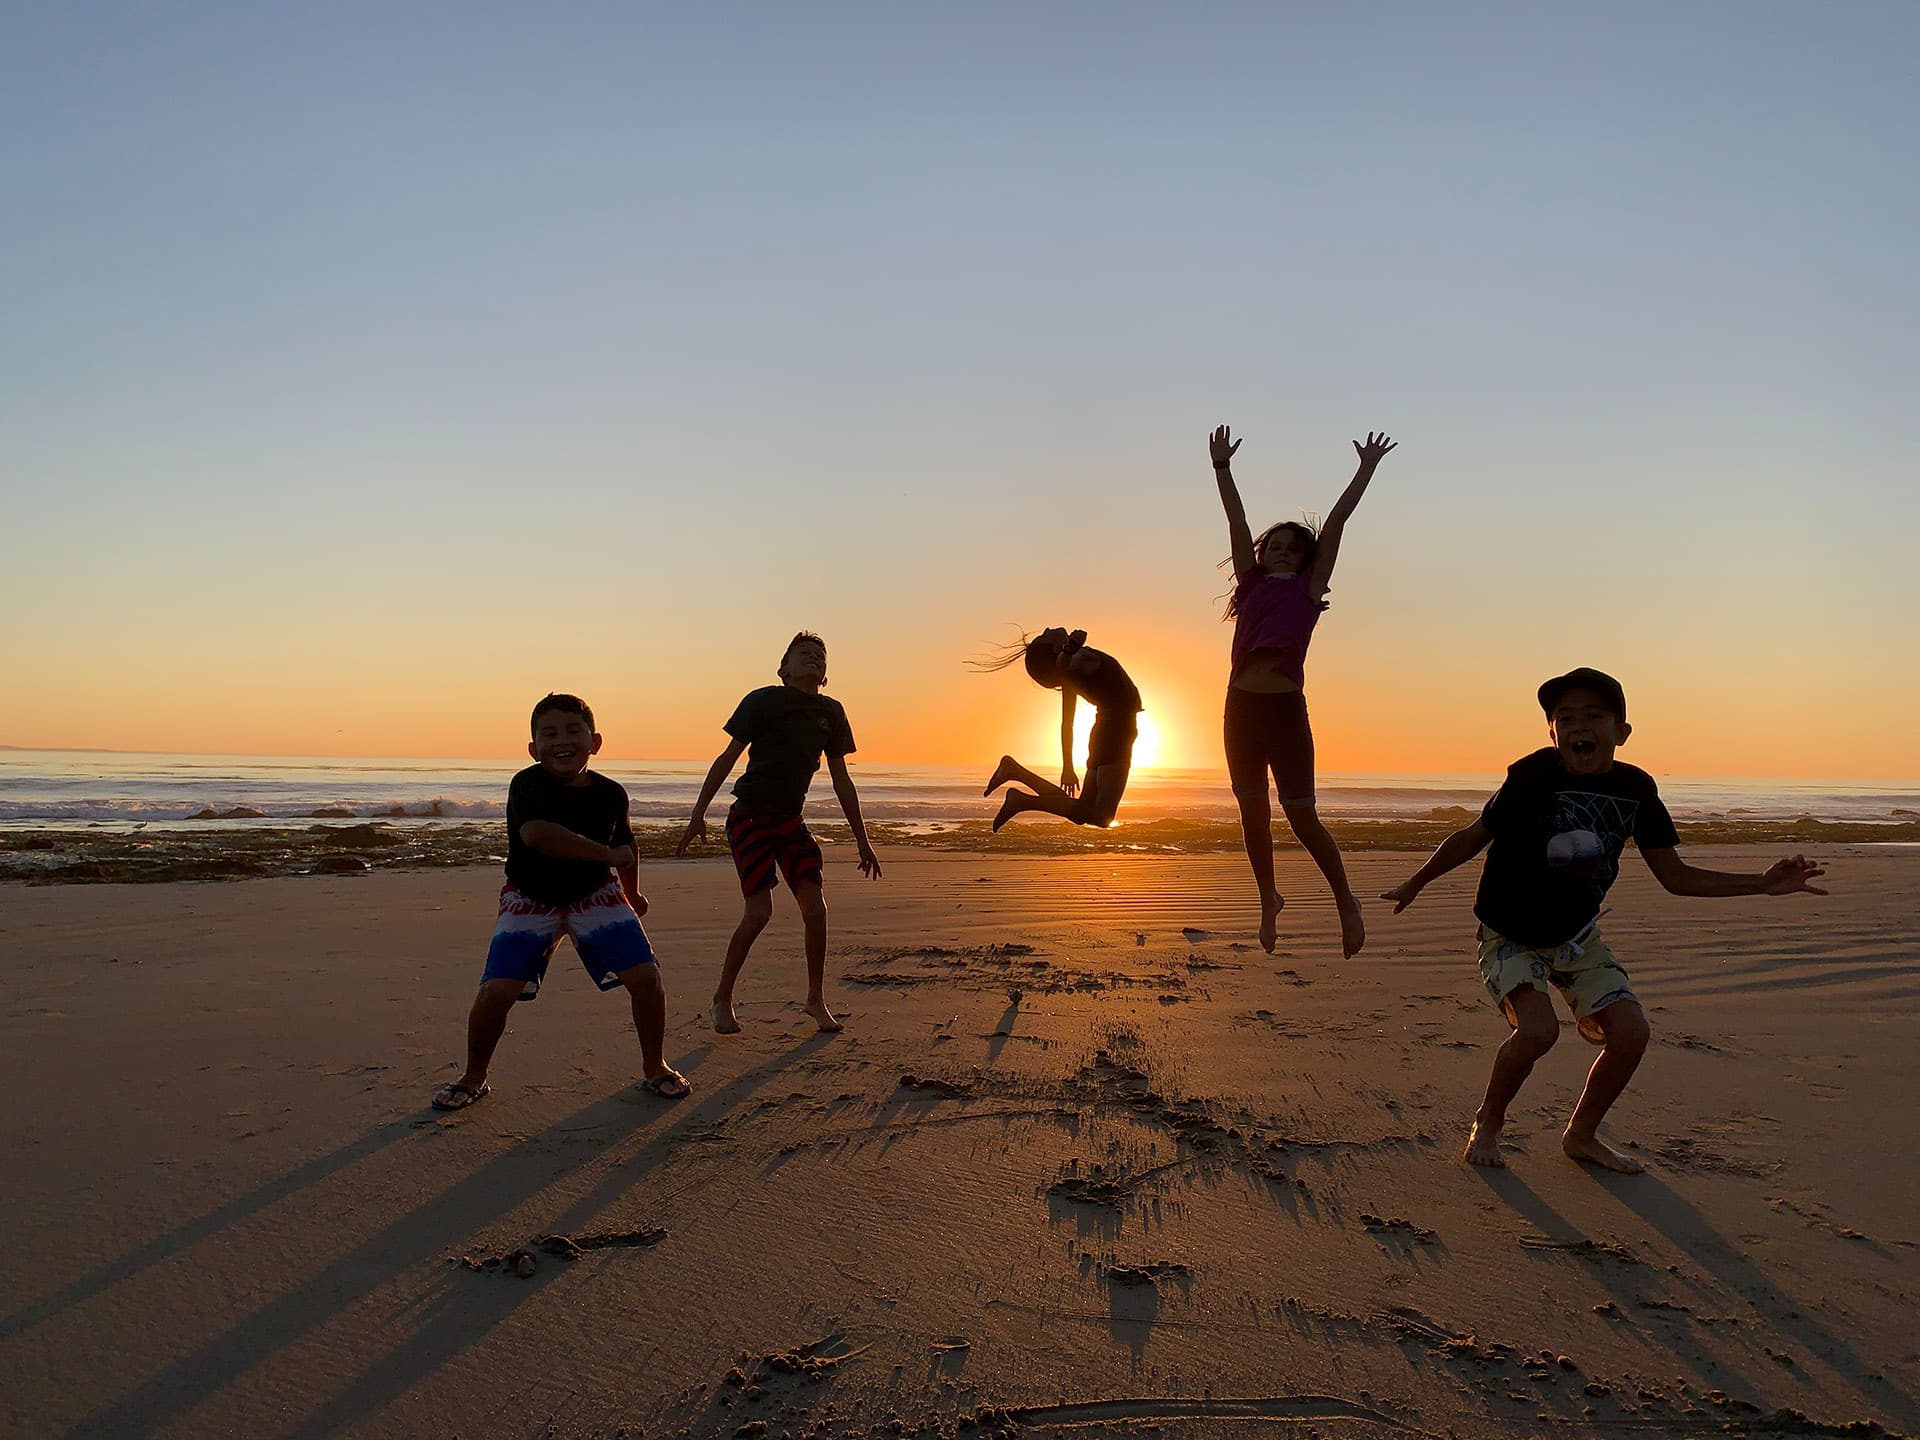 kids jump for joy on a beach with the sunset and ocean in the background